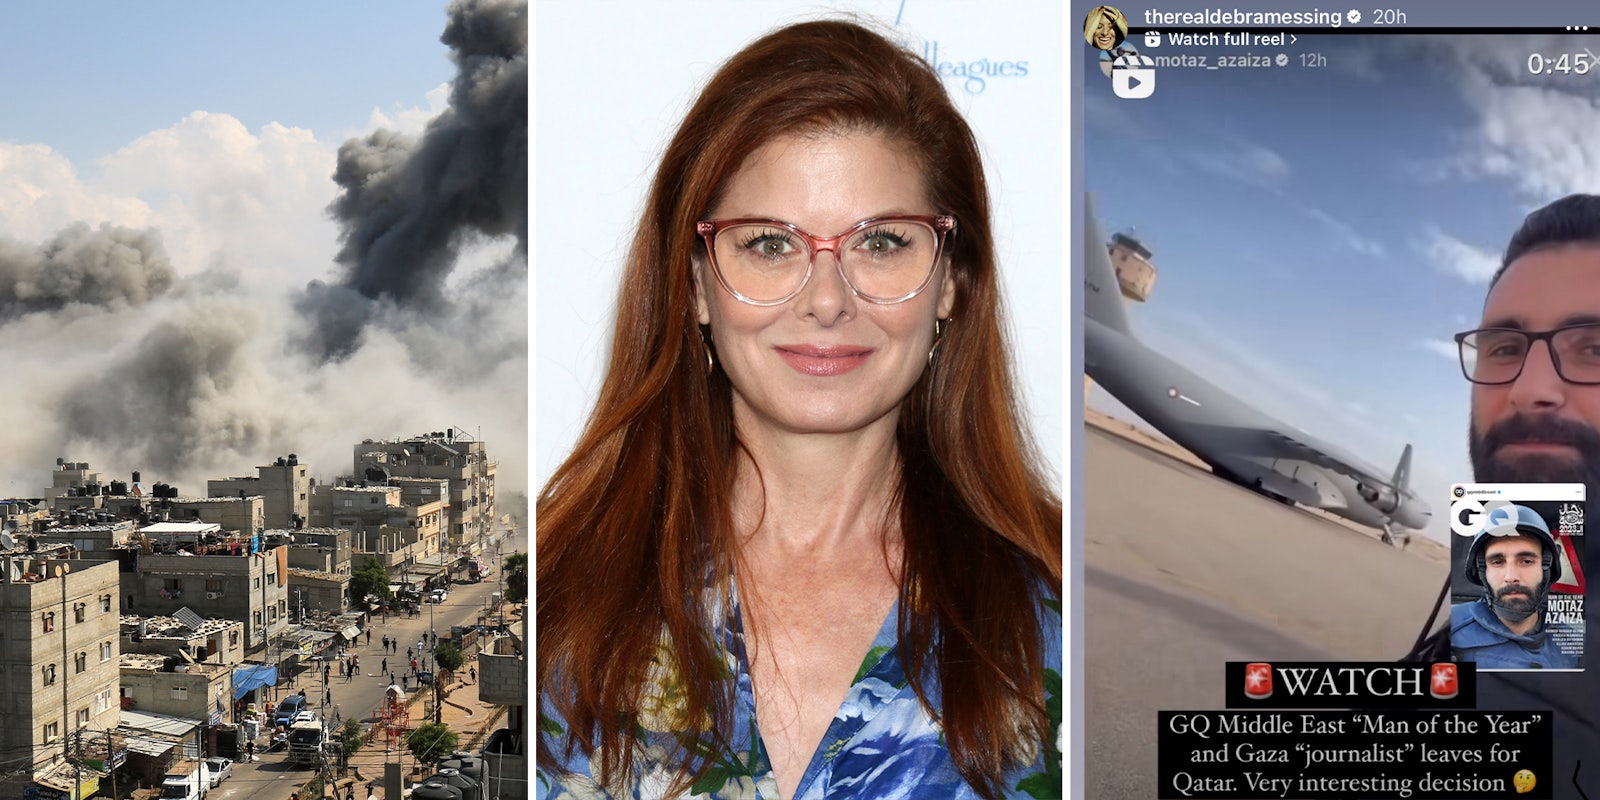 Actress Debra Messing stirs controversy after mocking journalists decision to flee Gaza